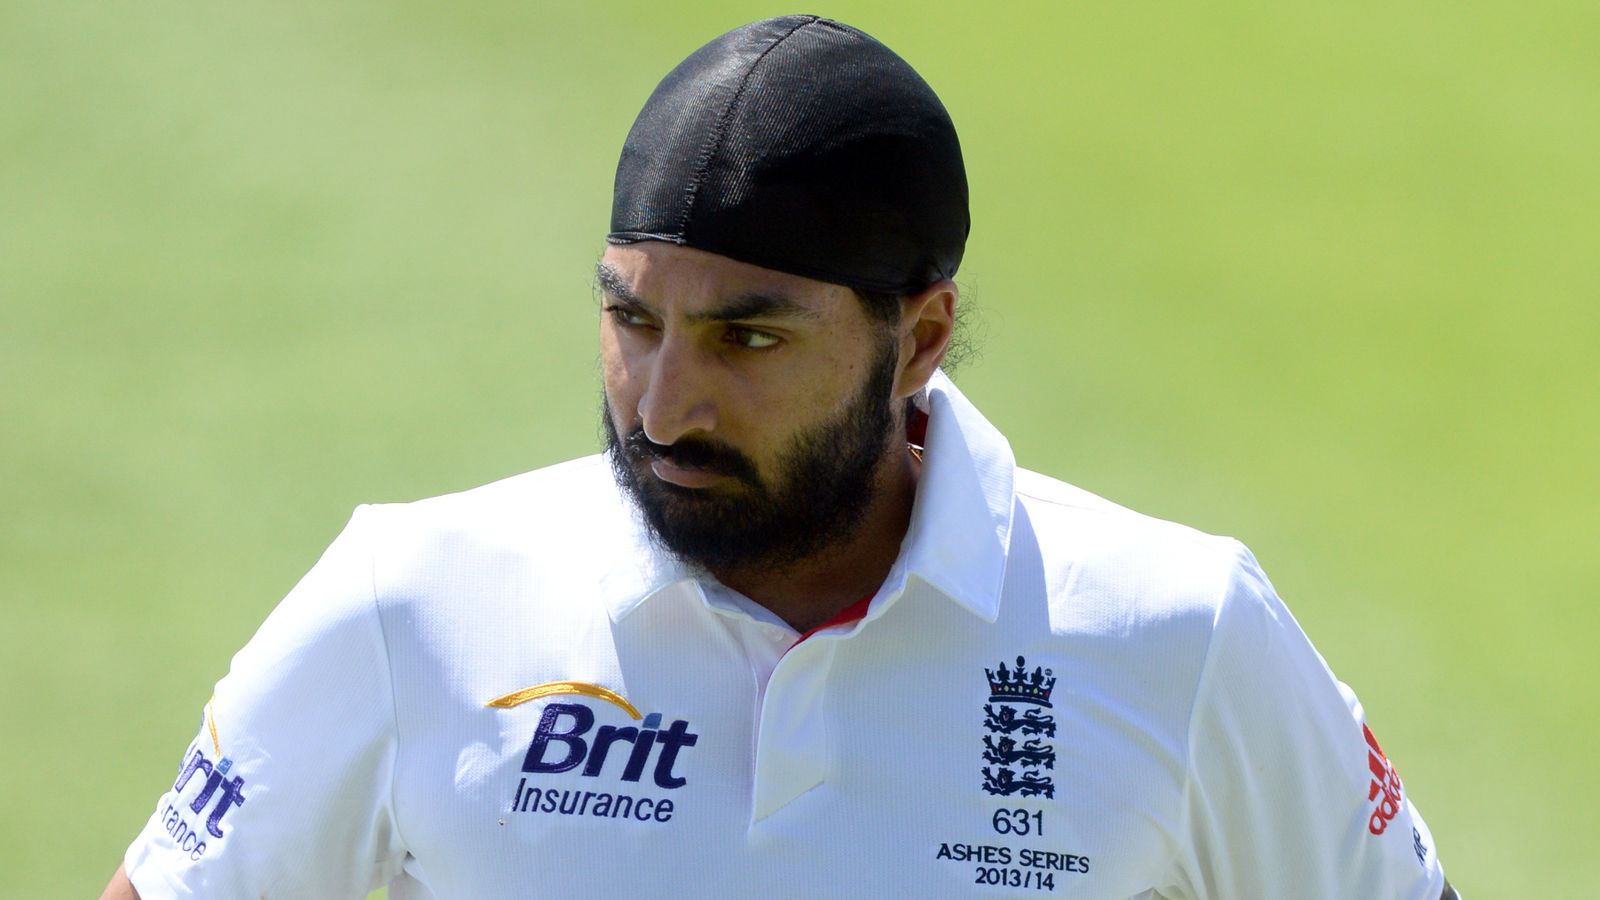 Monty Panesar: Ex-England cricket star quits George Galloway's party after a week